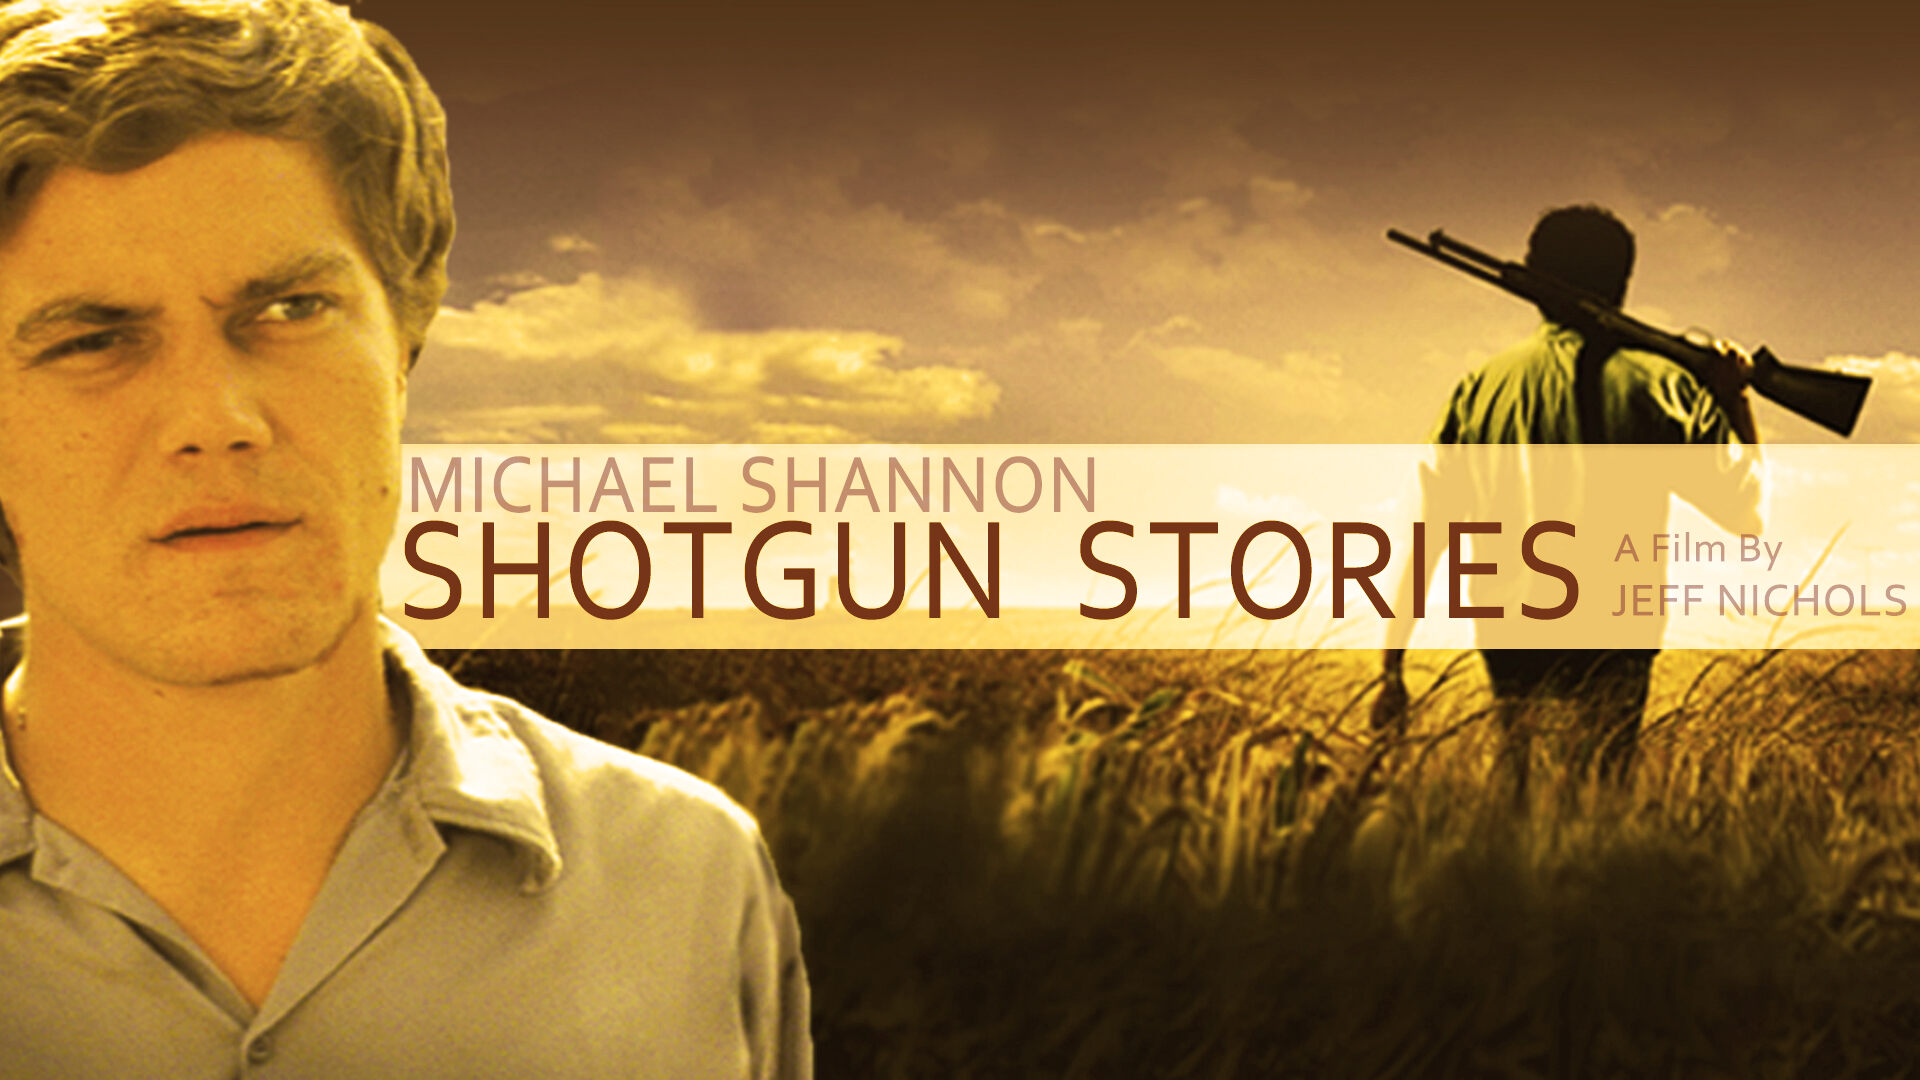 43-facts-about-the-movie-shotgun-stories